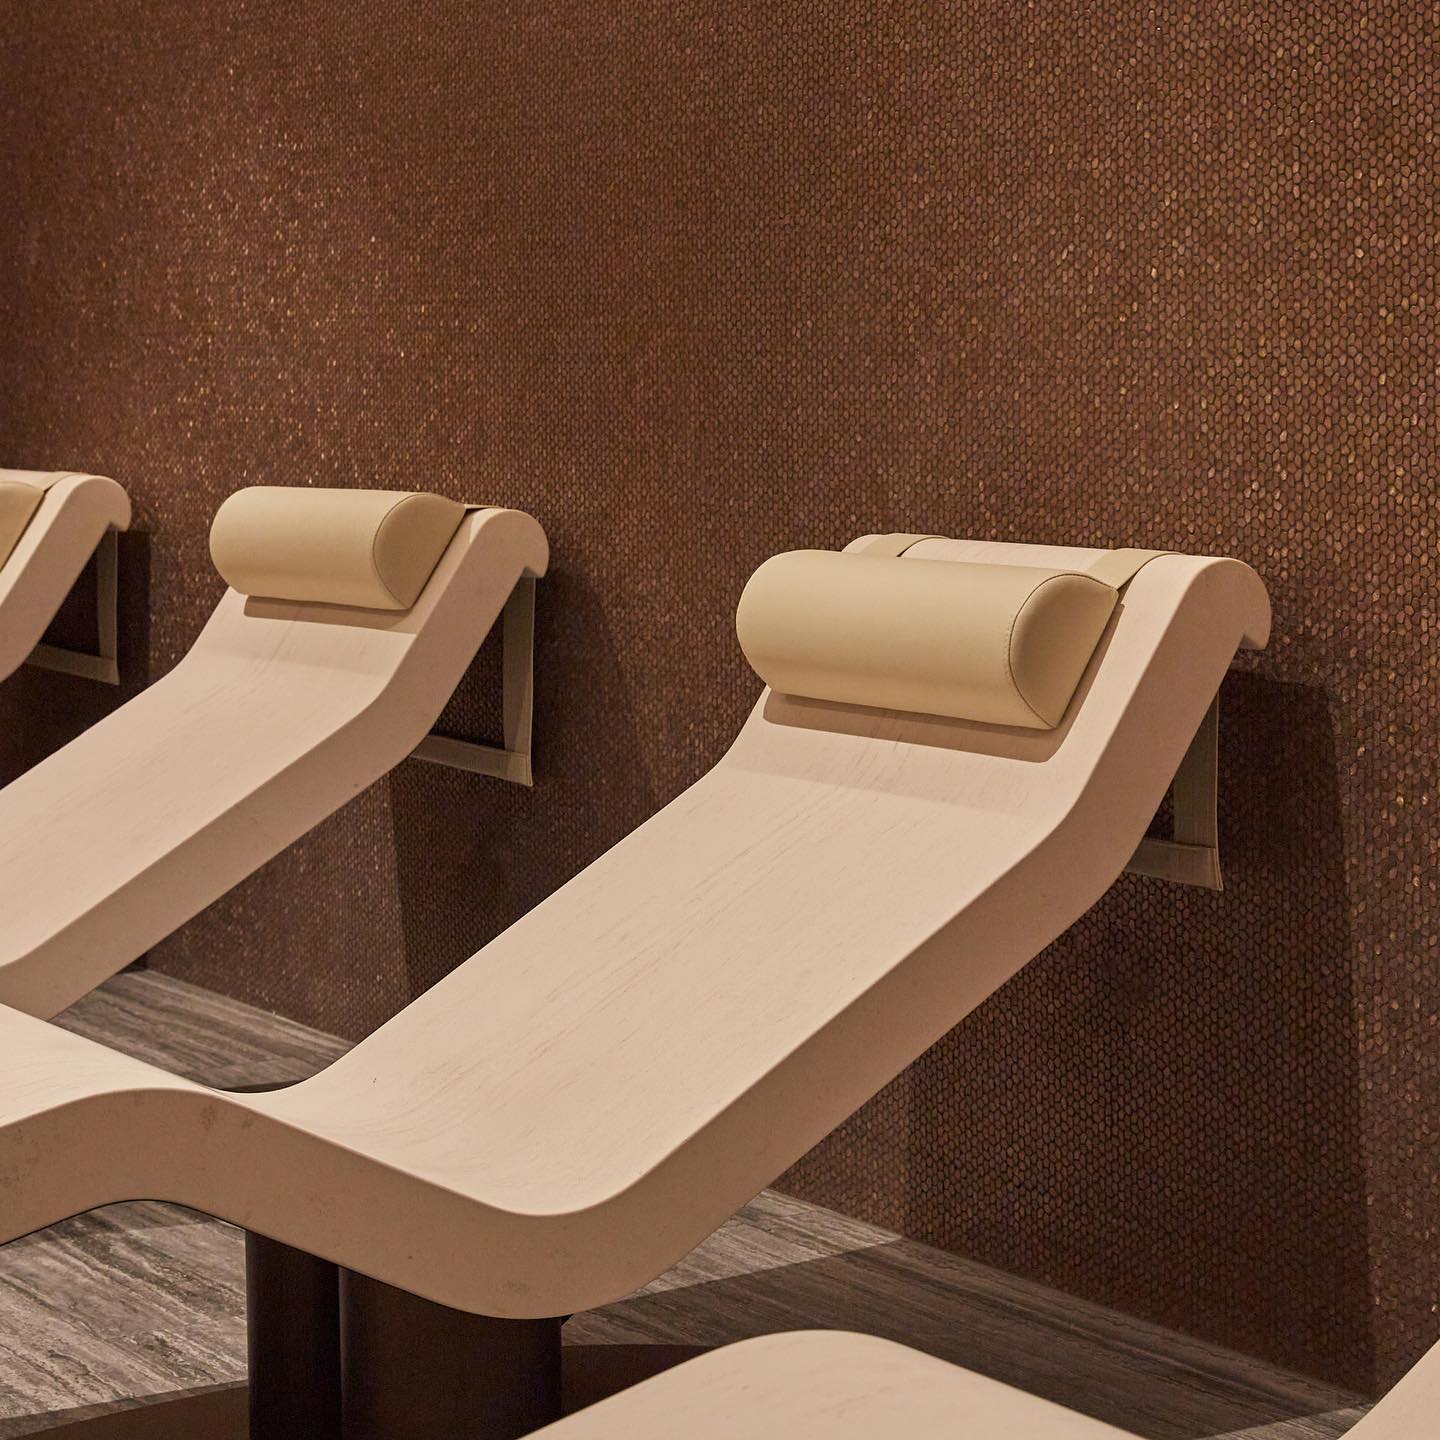 East Day Spa unveils newly refurbished space and treatments